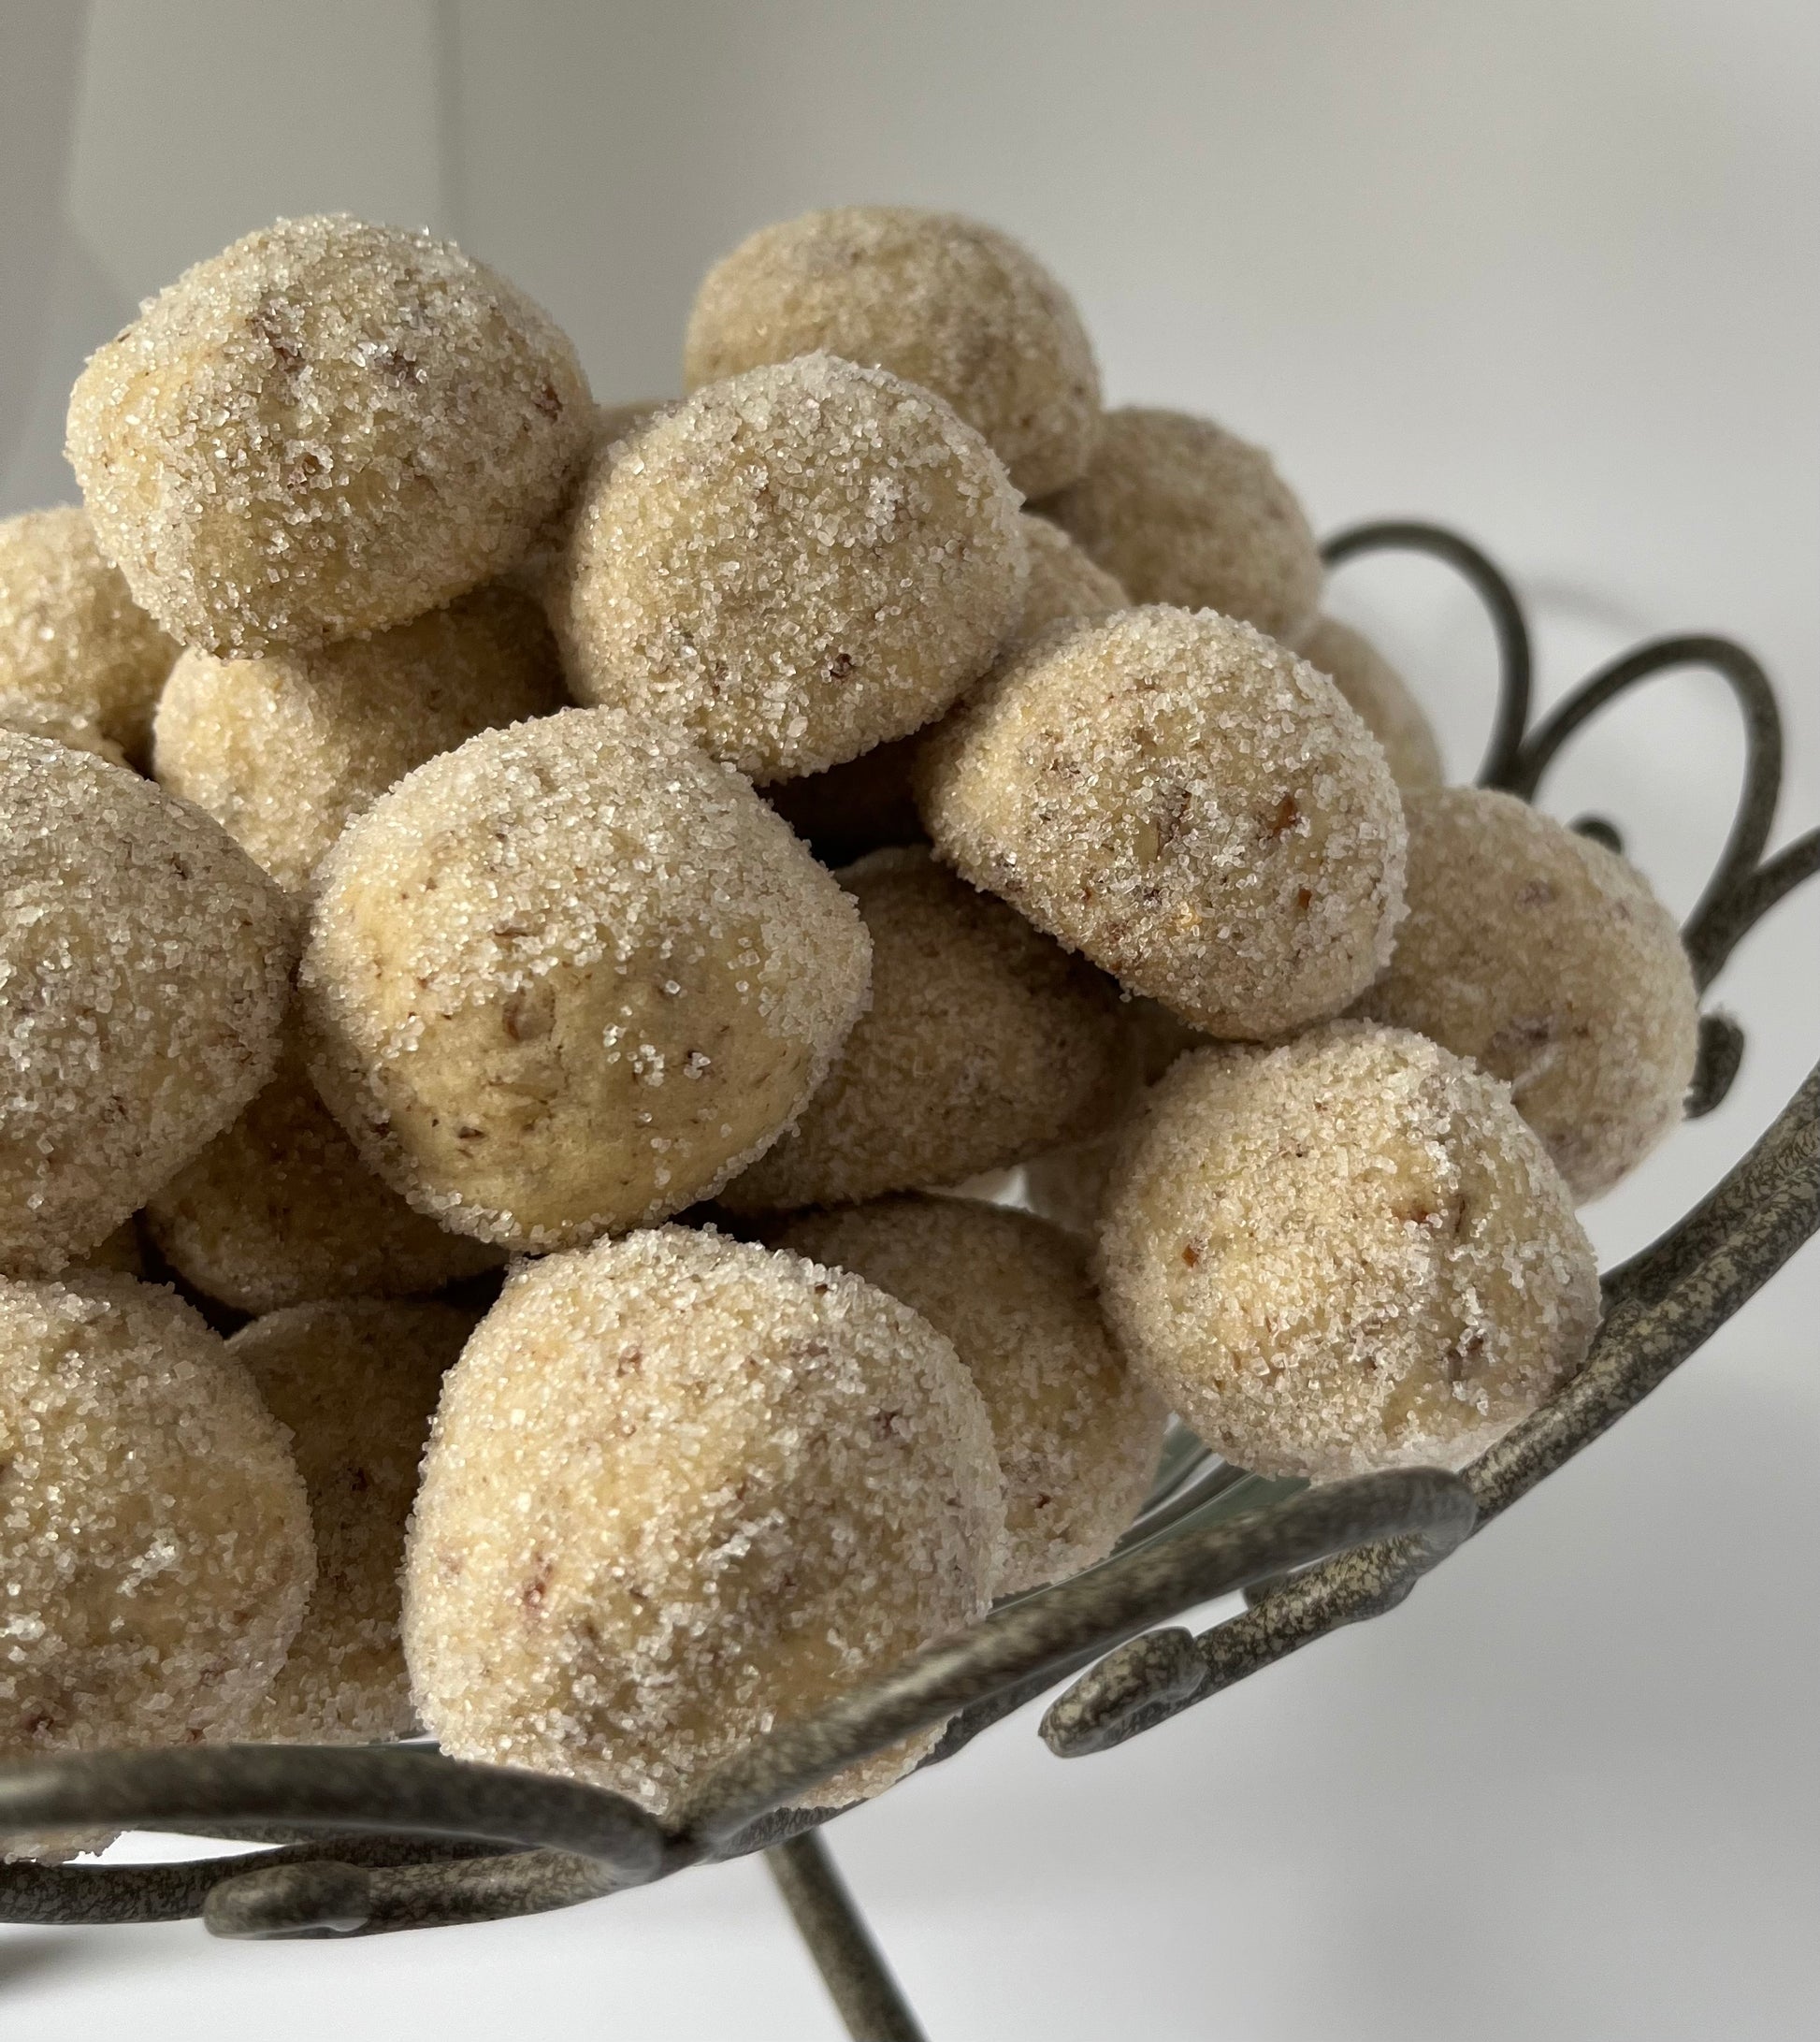 Pecan Premium Fancy Pom-poms. French tea cakes made with French flour, fresh pecans, and creamy butter rolled over fine granulated sugar.